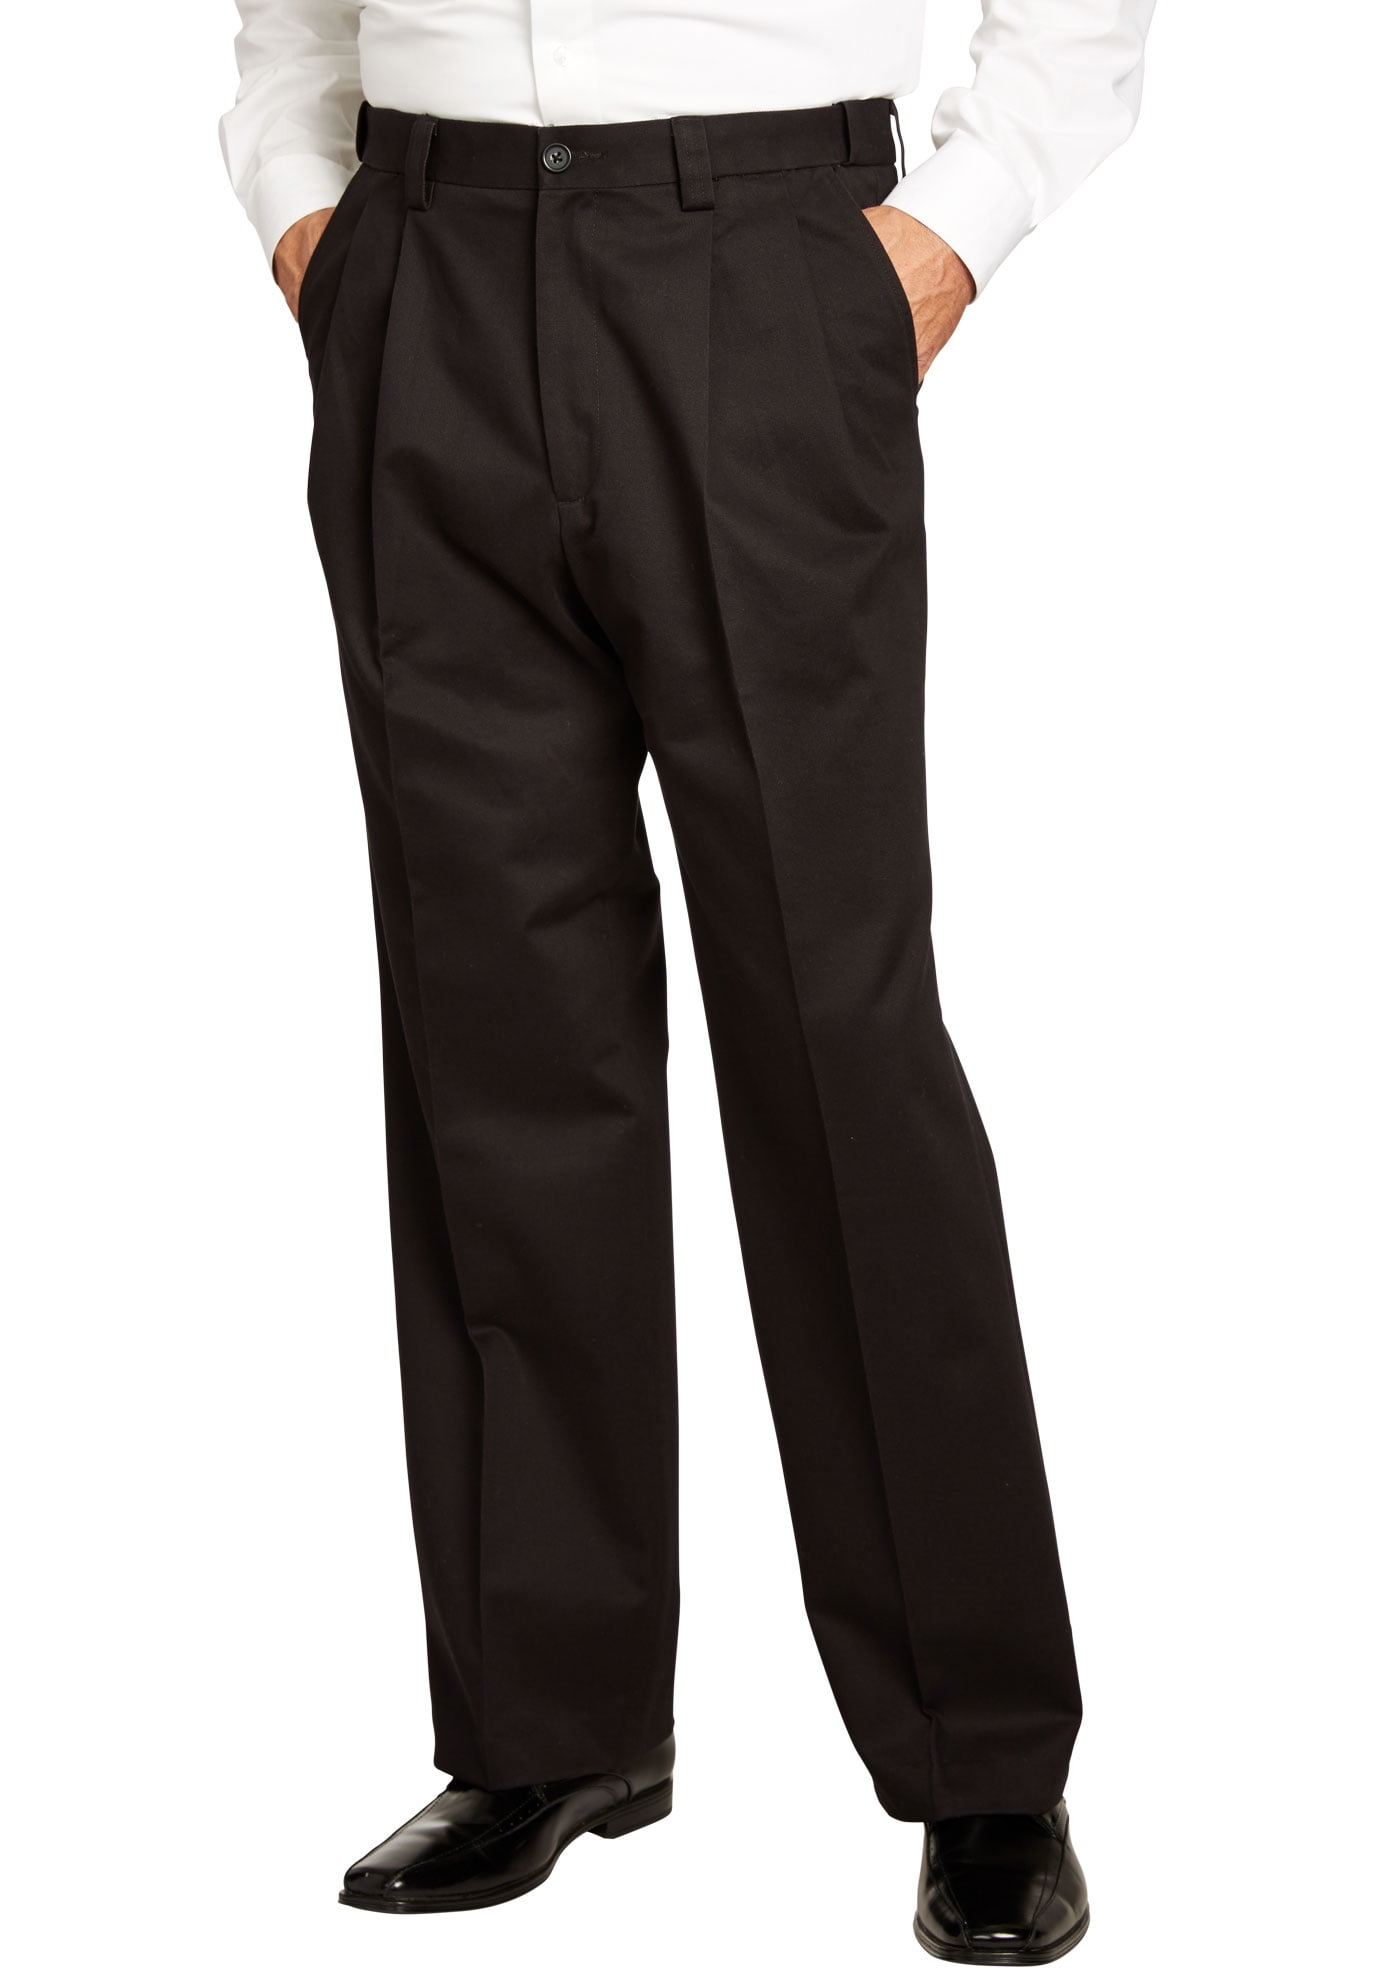 WRINKLE-FREE PANTS WITH EXPANDABLE WAIST, WIDE LEG | King Size